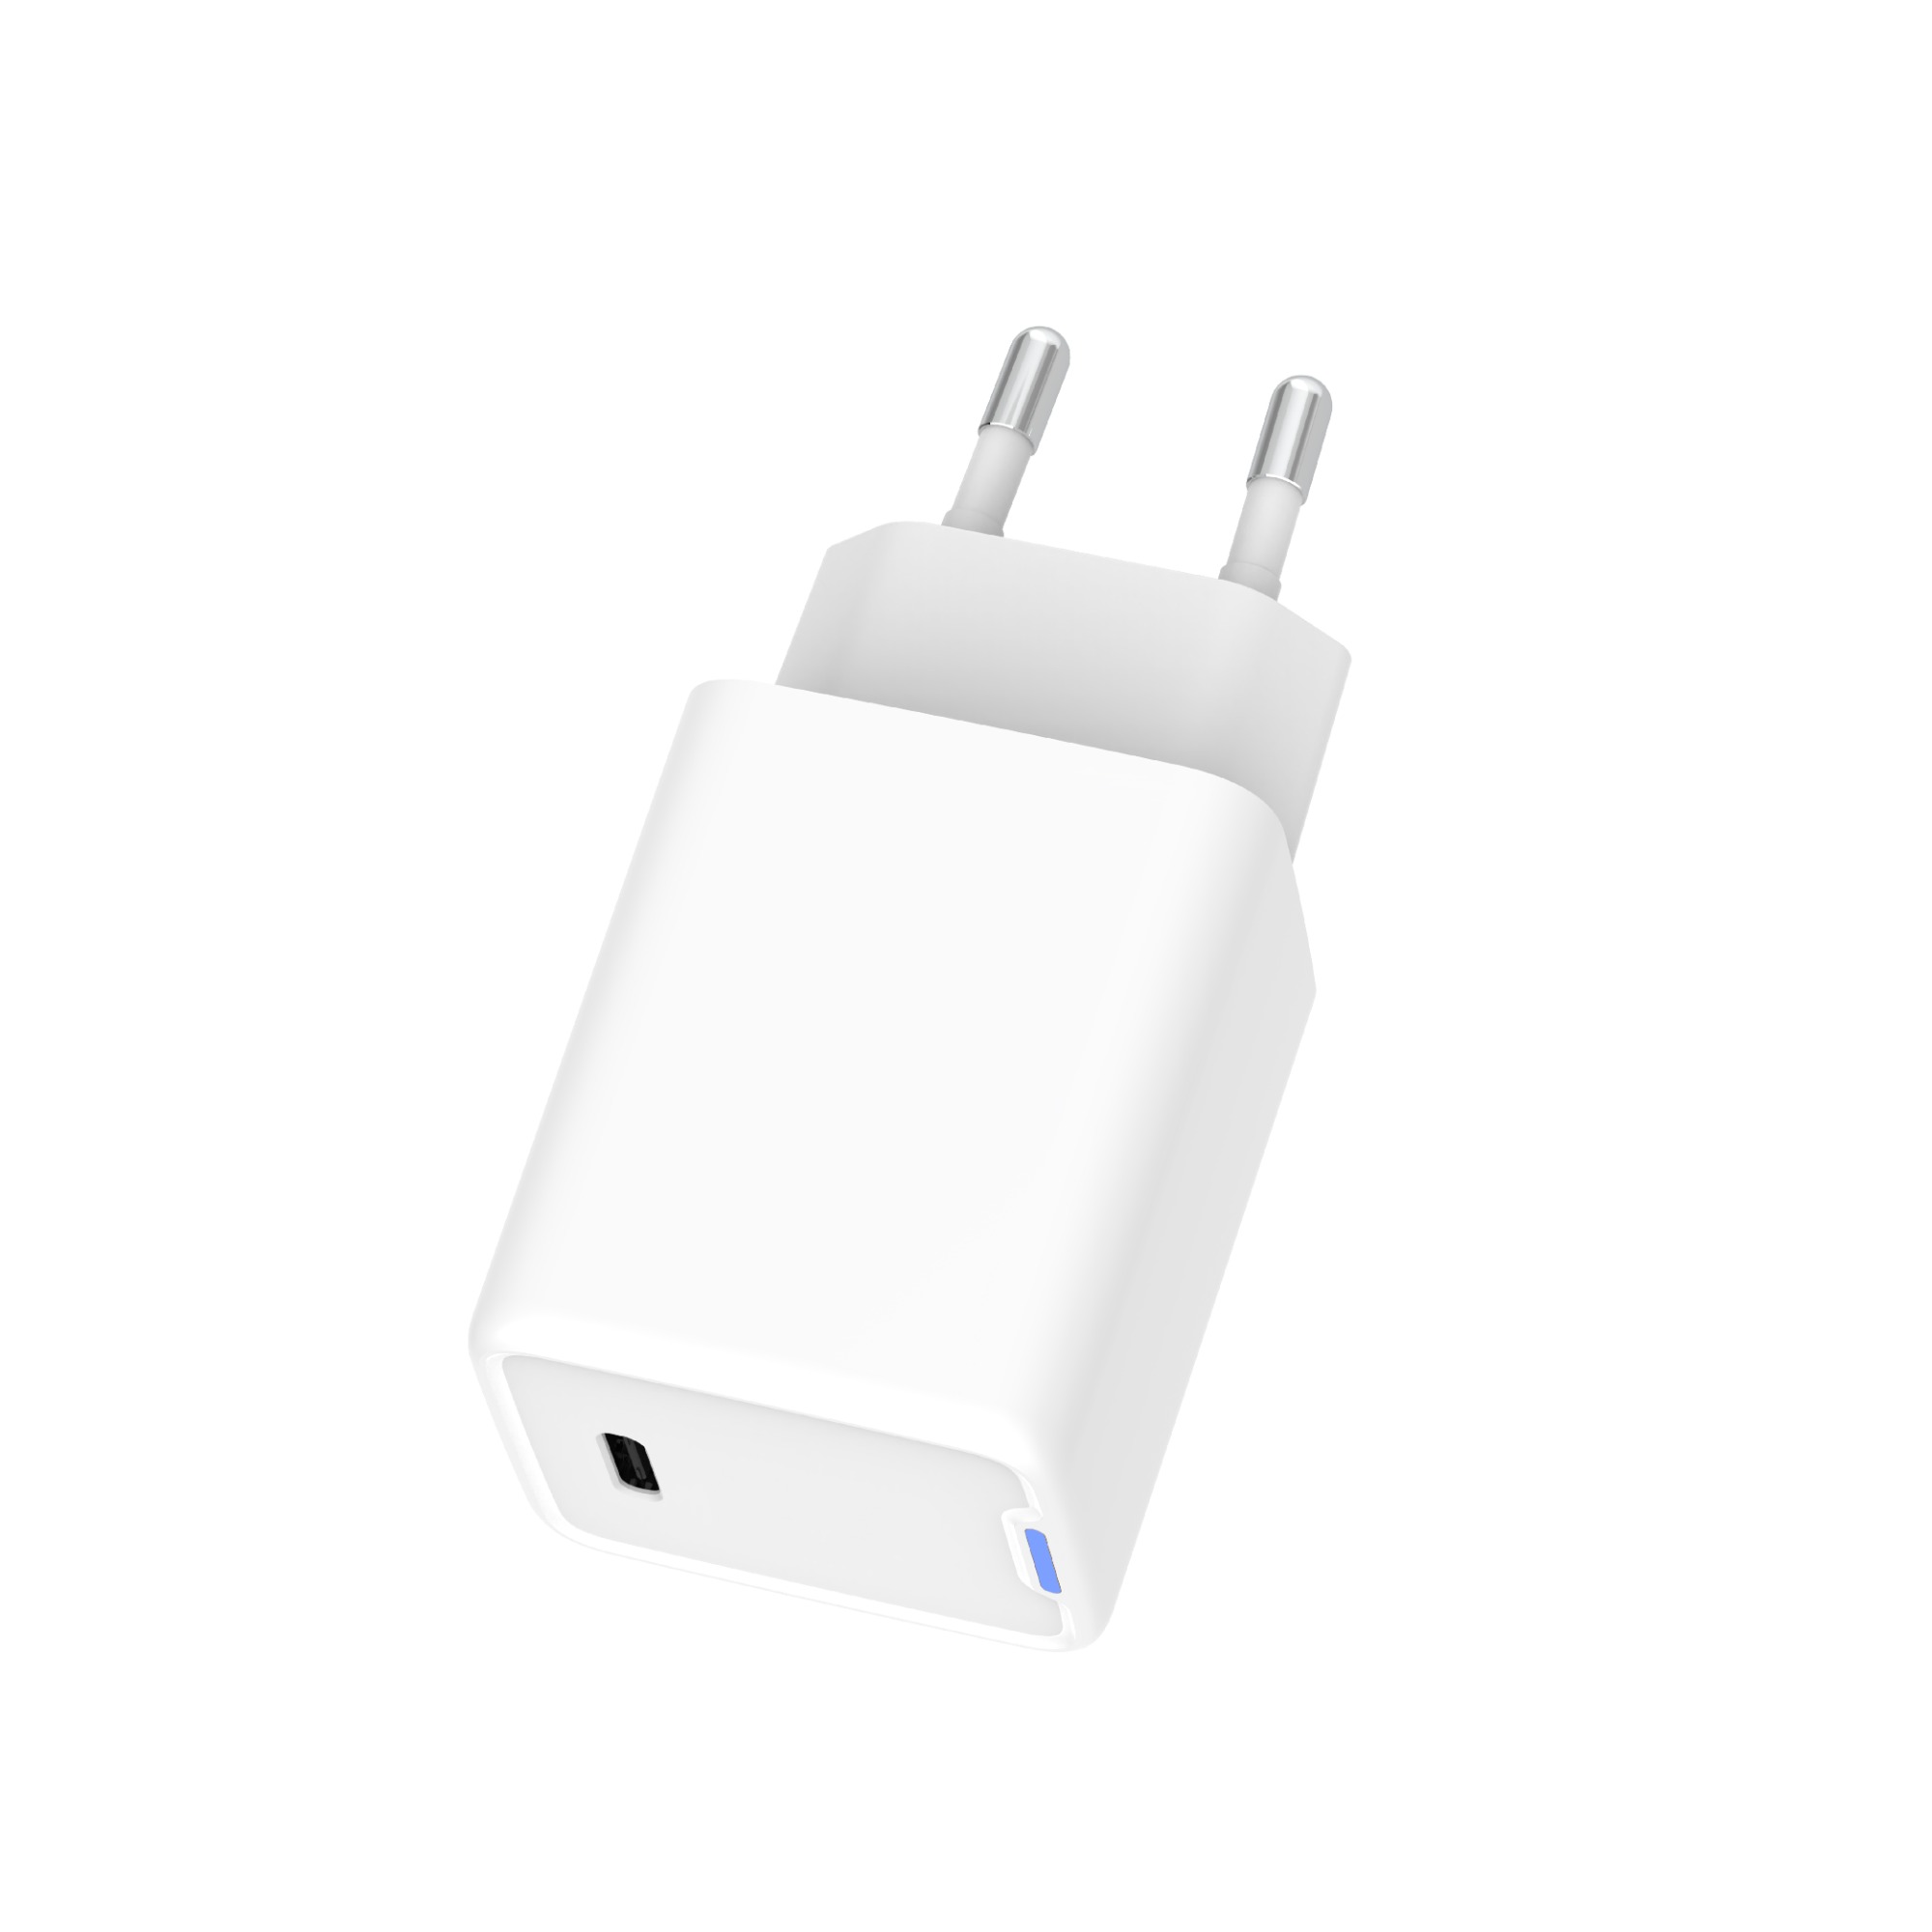 Zonhop GaN Mini 65W Type-C 1 Port PD Wall Charger For Phone